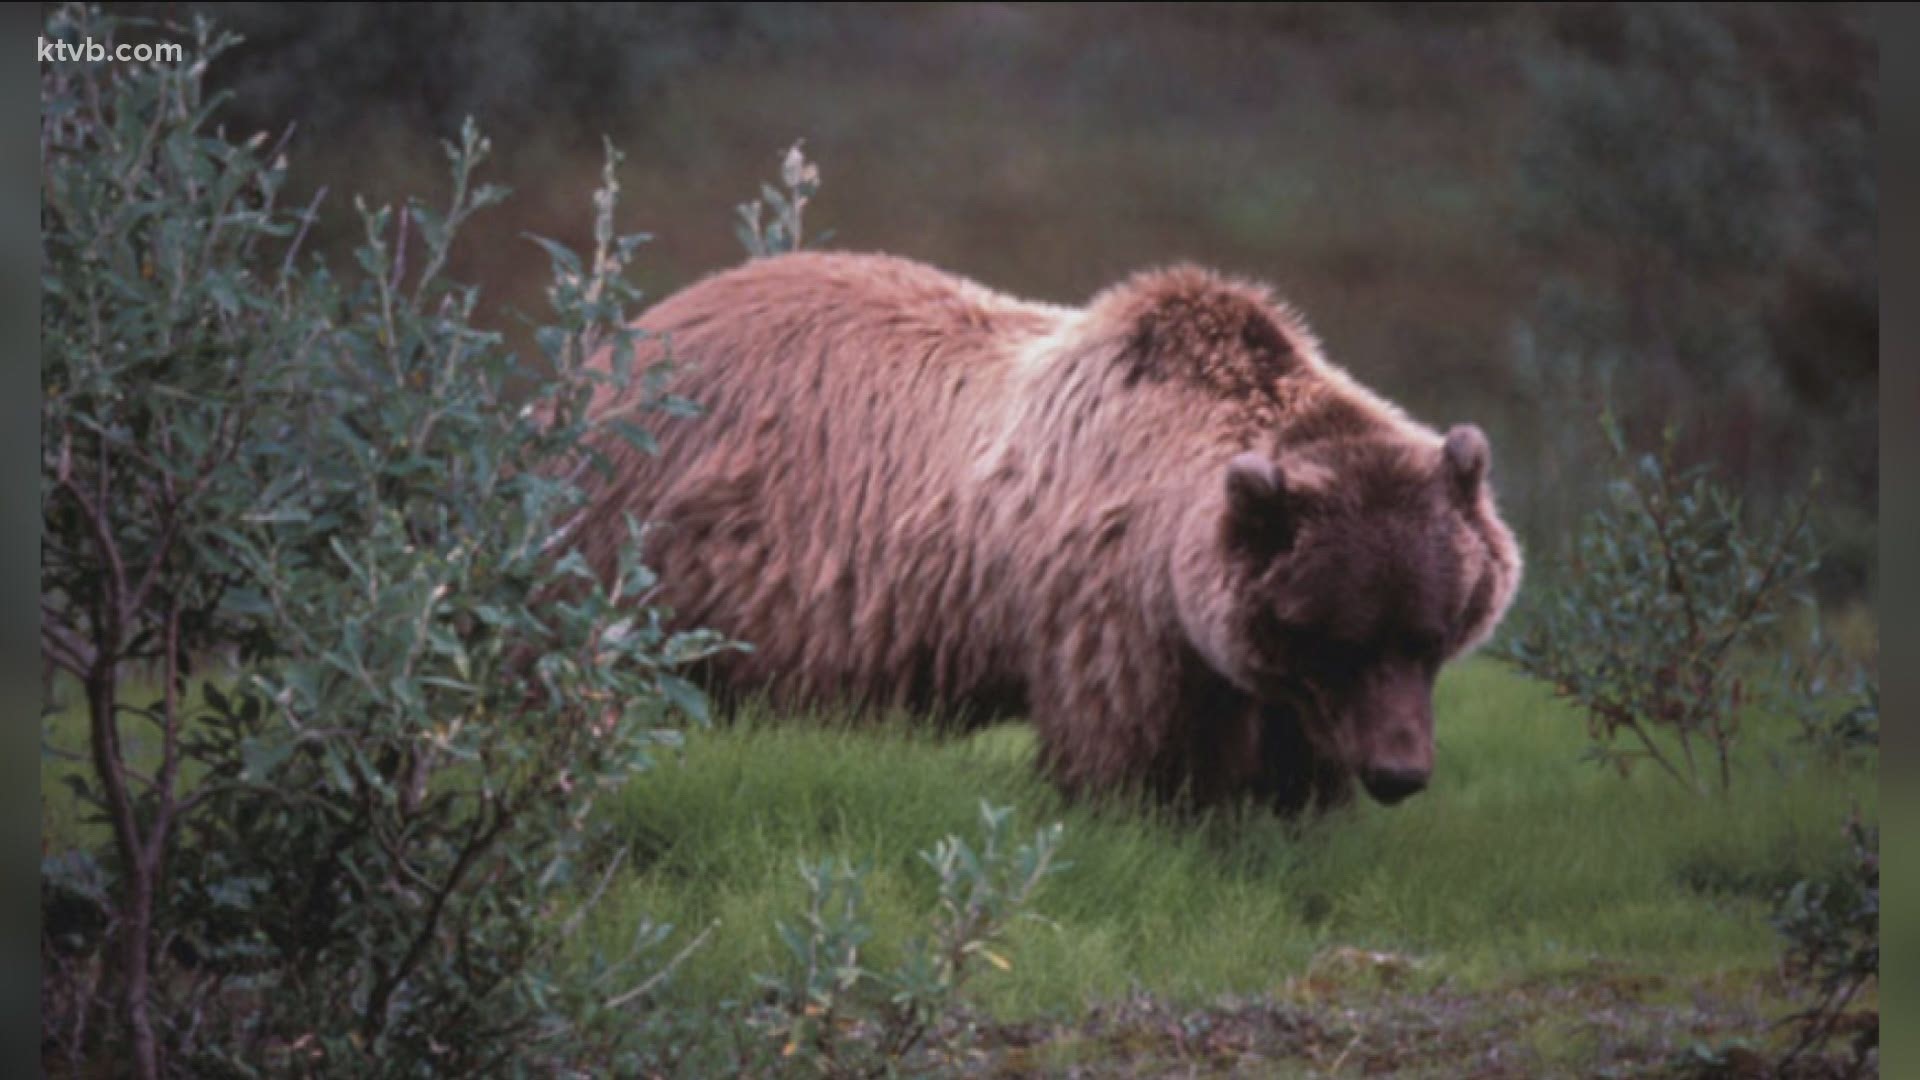 Idaho Sens. Mike Crapo and Jim Risch are co-sponsoring a bill that remove grizzlies from federal protection and put them under state management.